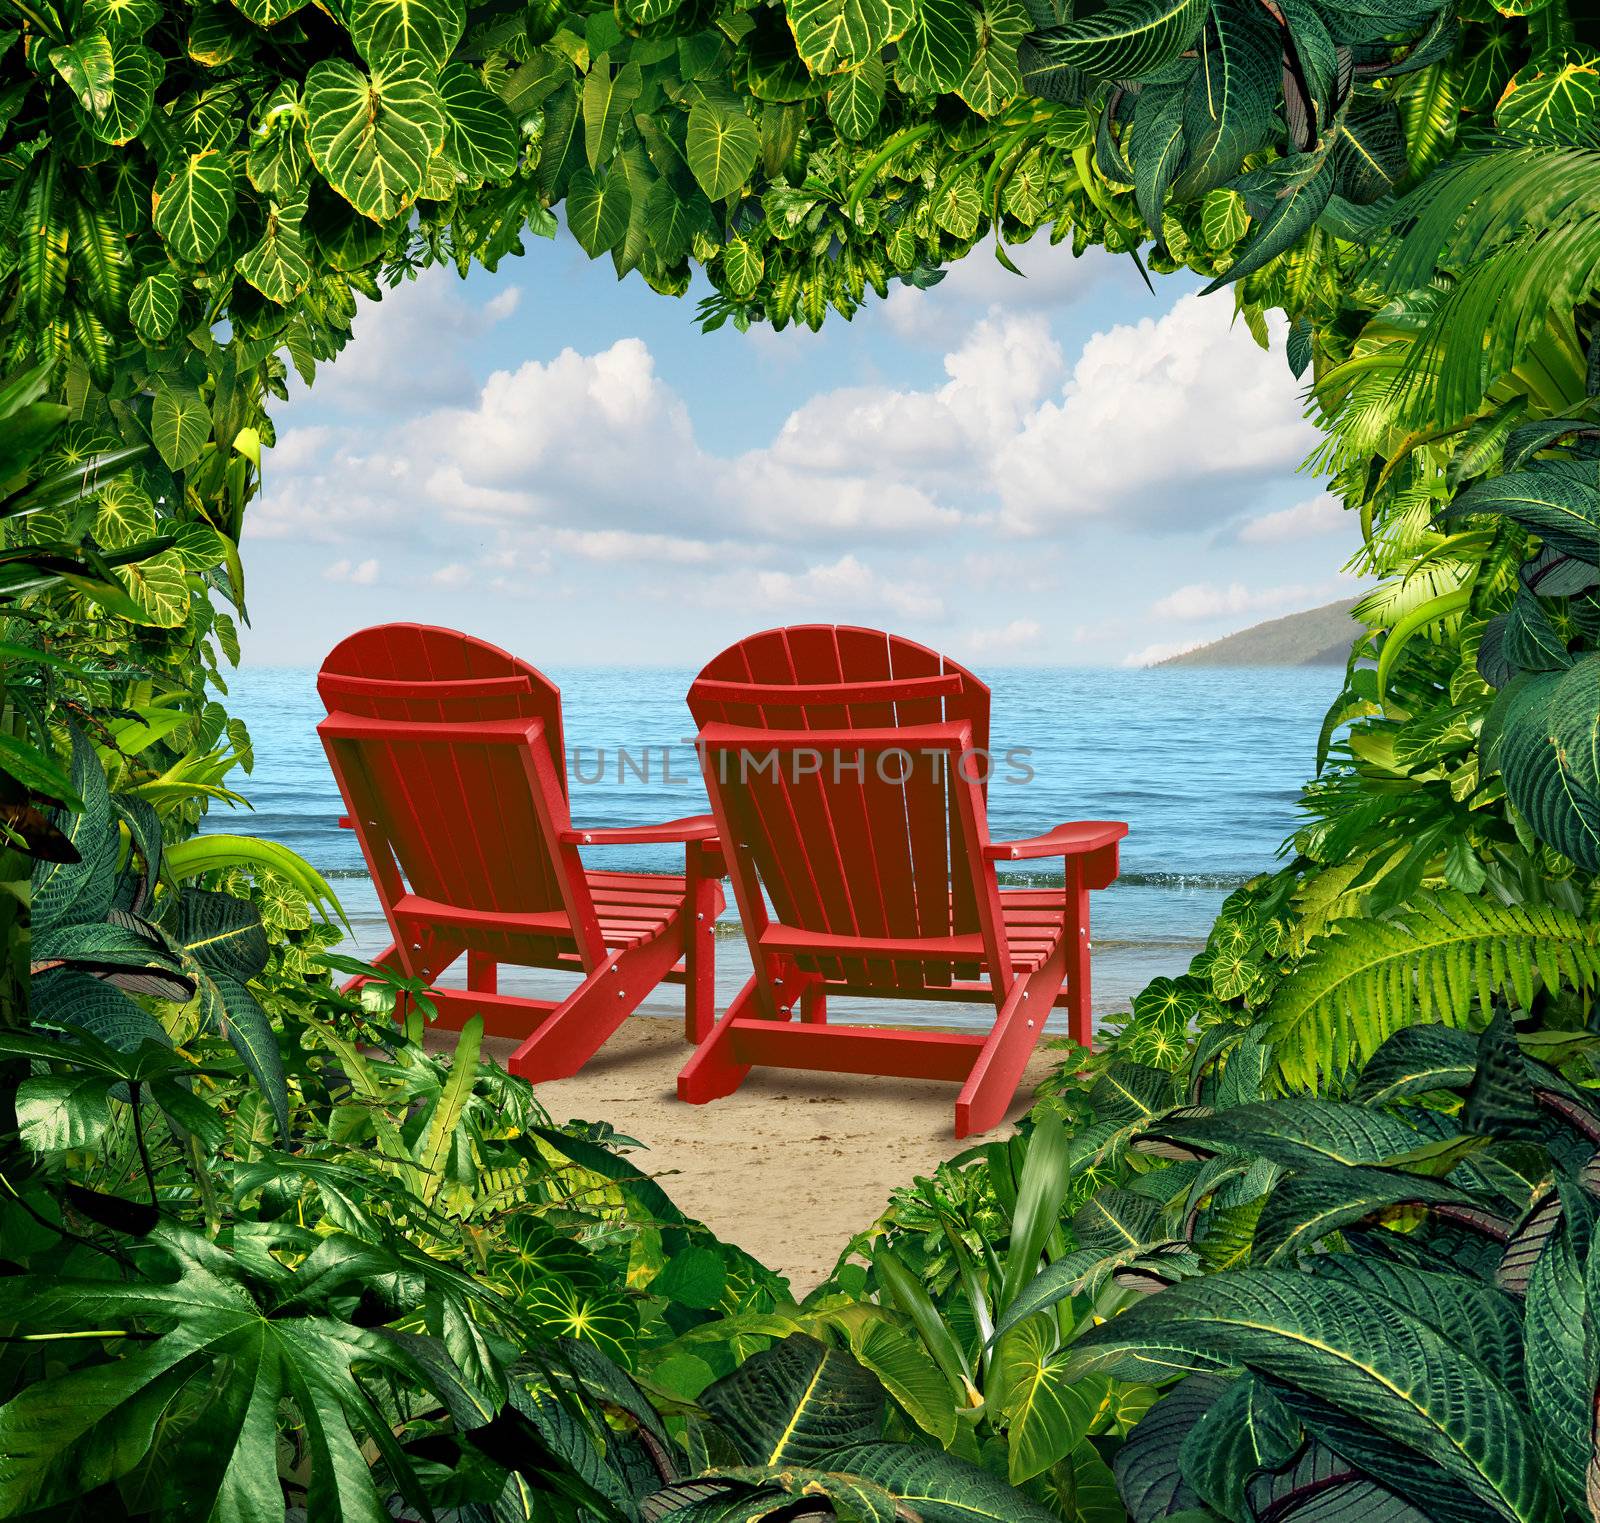 Romantic getaway and escape to a tropical beach vacation concept with two red adirondack chairs with jungle plants in the shape of a love heart as a travel and traveling symbol for lovers and couples.